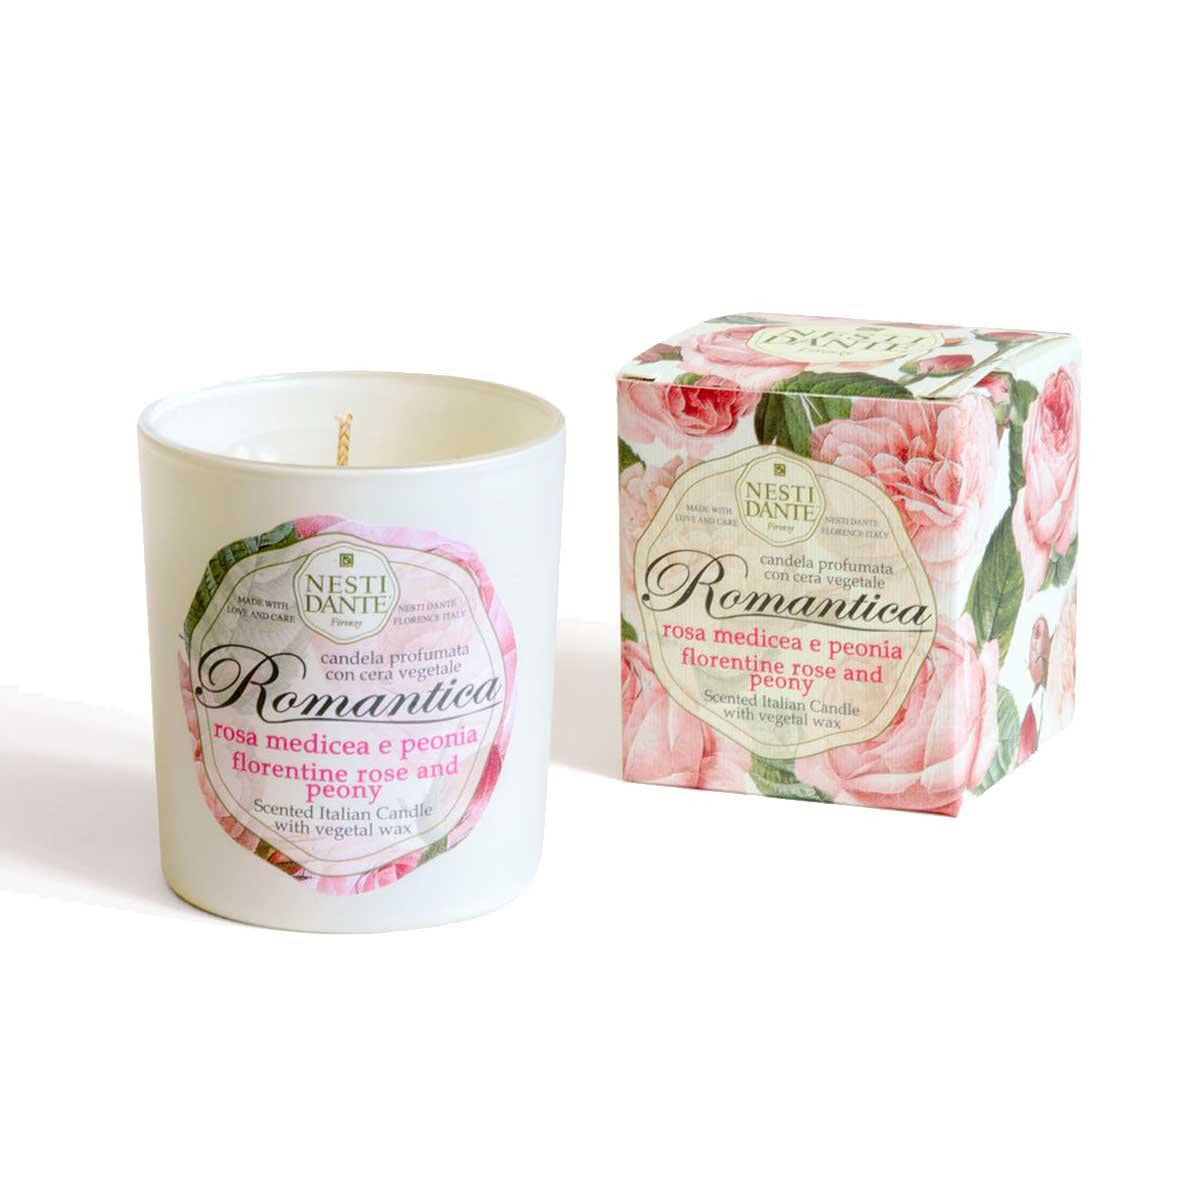 Romantica Scented Candle - Florentine Rose and Peony